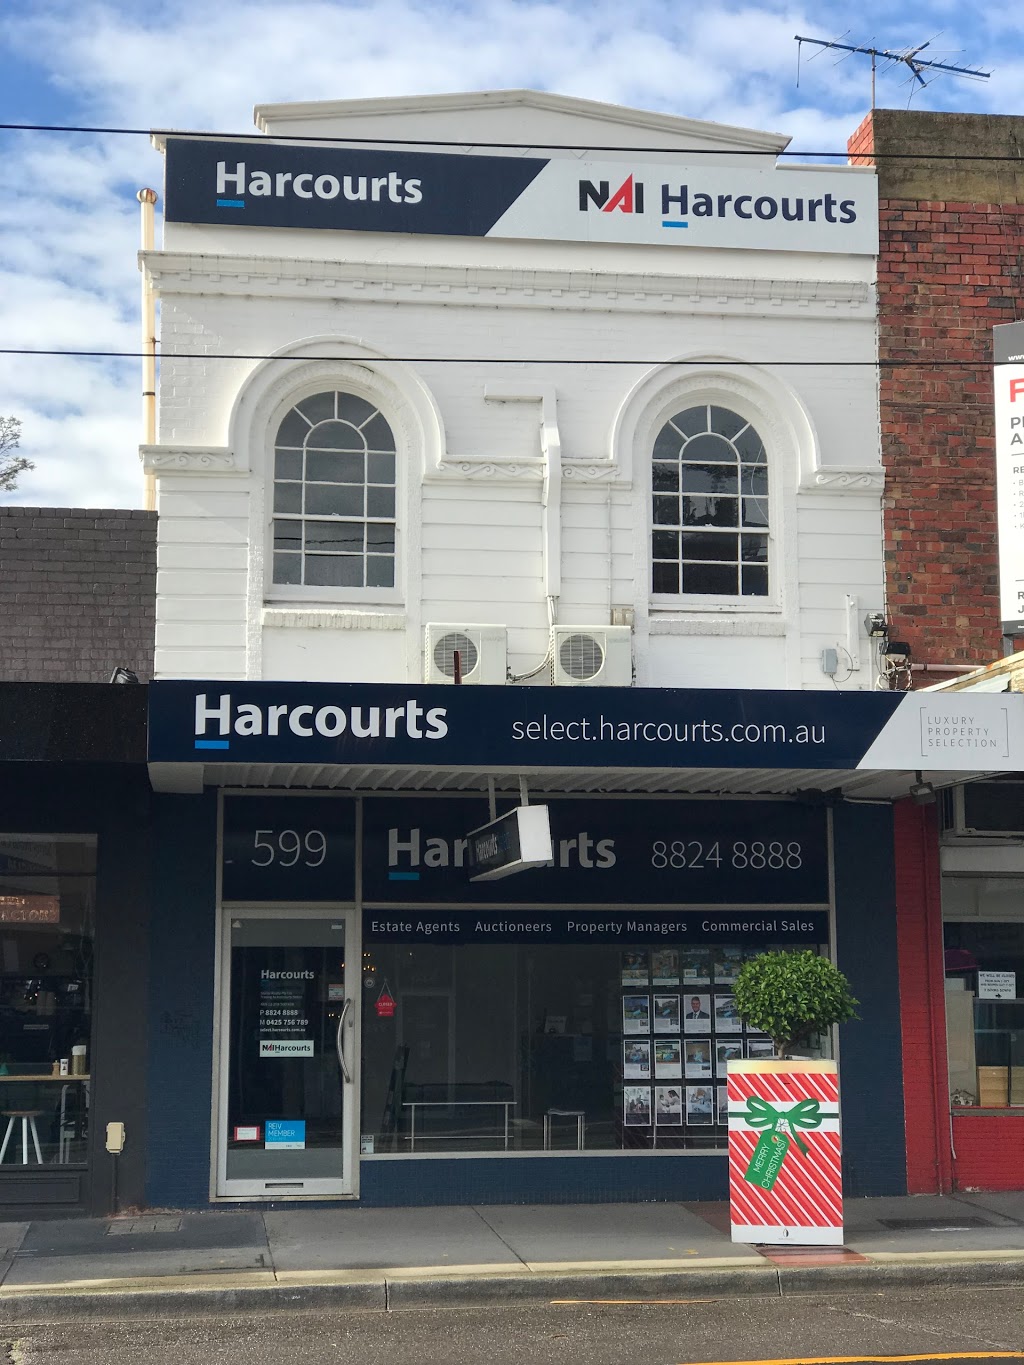 Harcourts Select | real estate agency | 599 Whitehorse Rd, Surrey Hills VIC 3127, Australia | 0388248888 OR +61 3 8824 8888